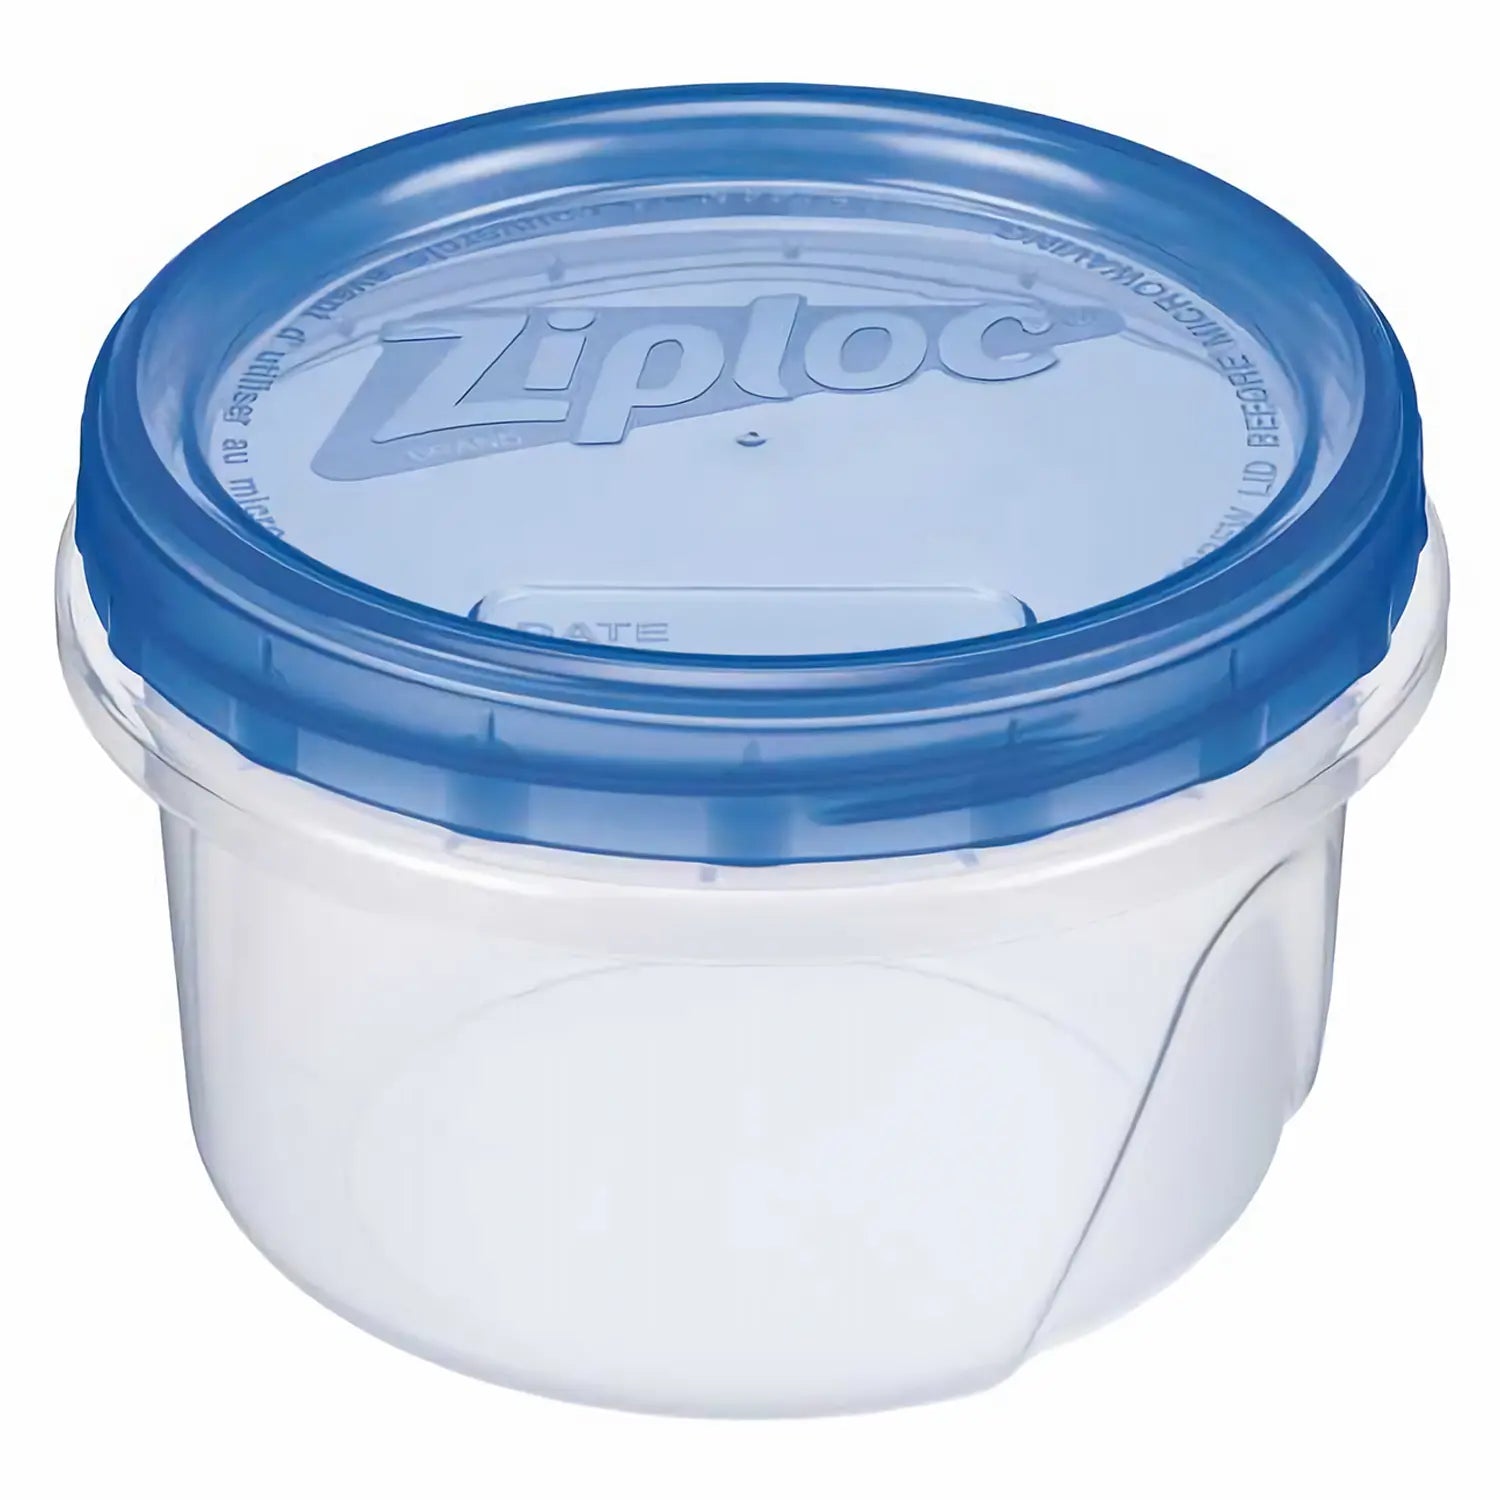 Ziploc Brand Holiday Food Storage Containers Twist 'N Loc, Small